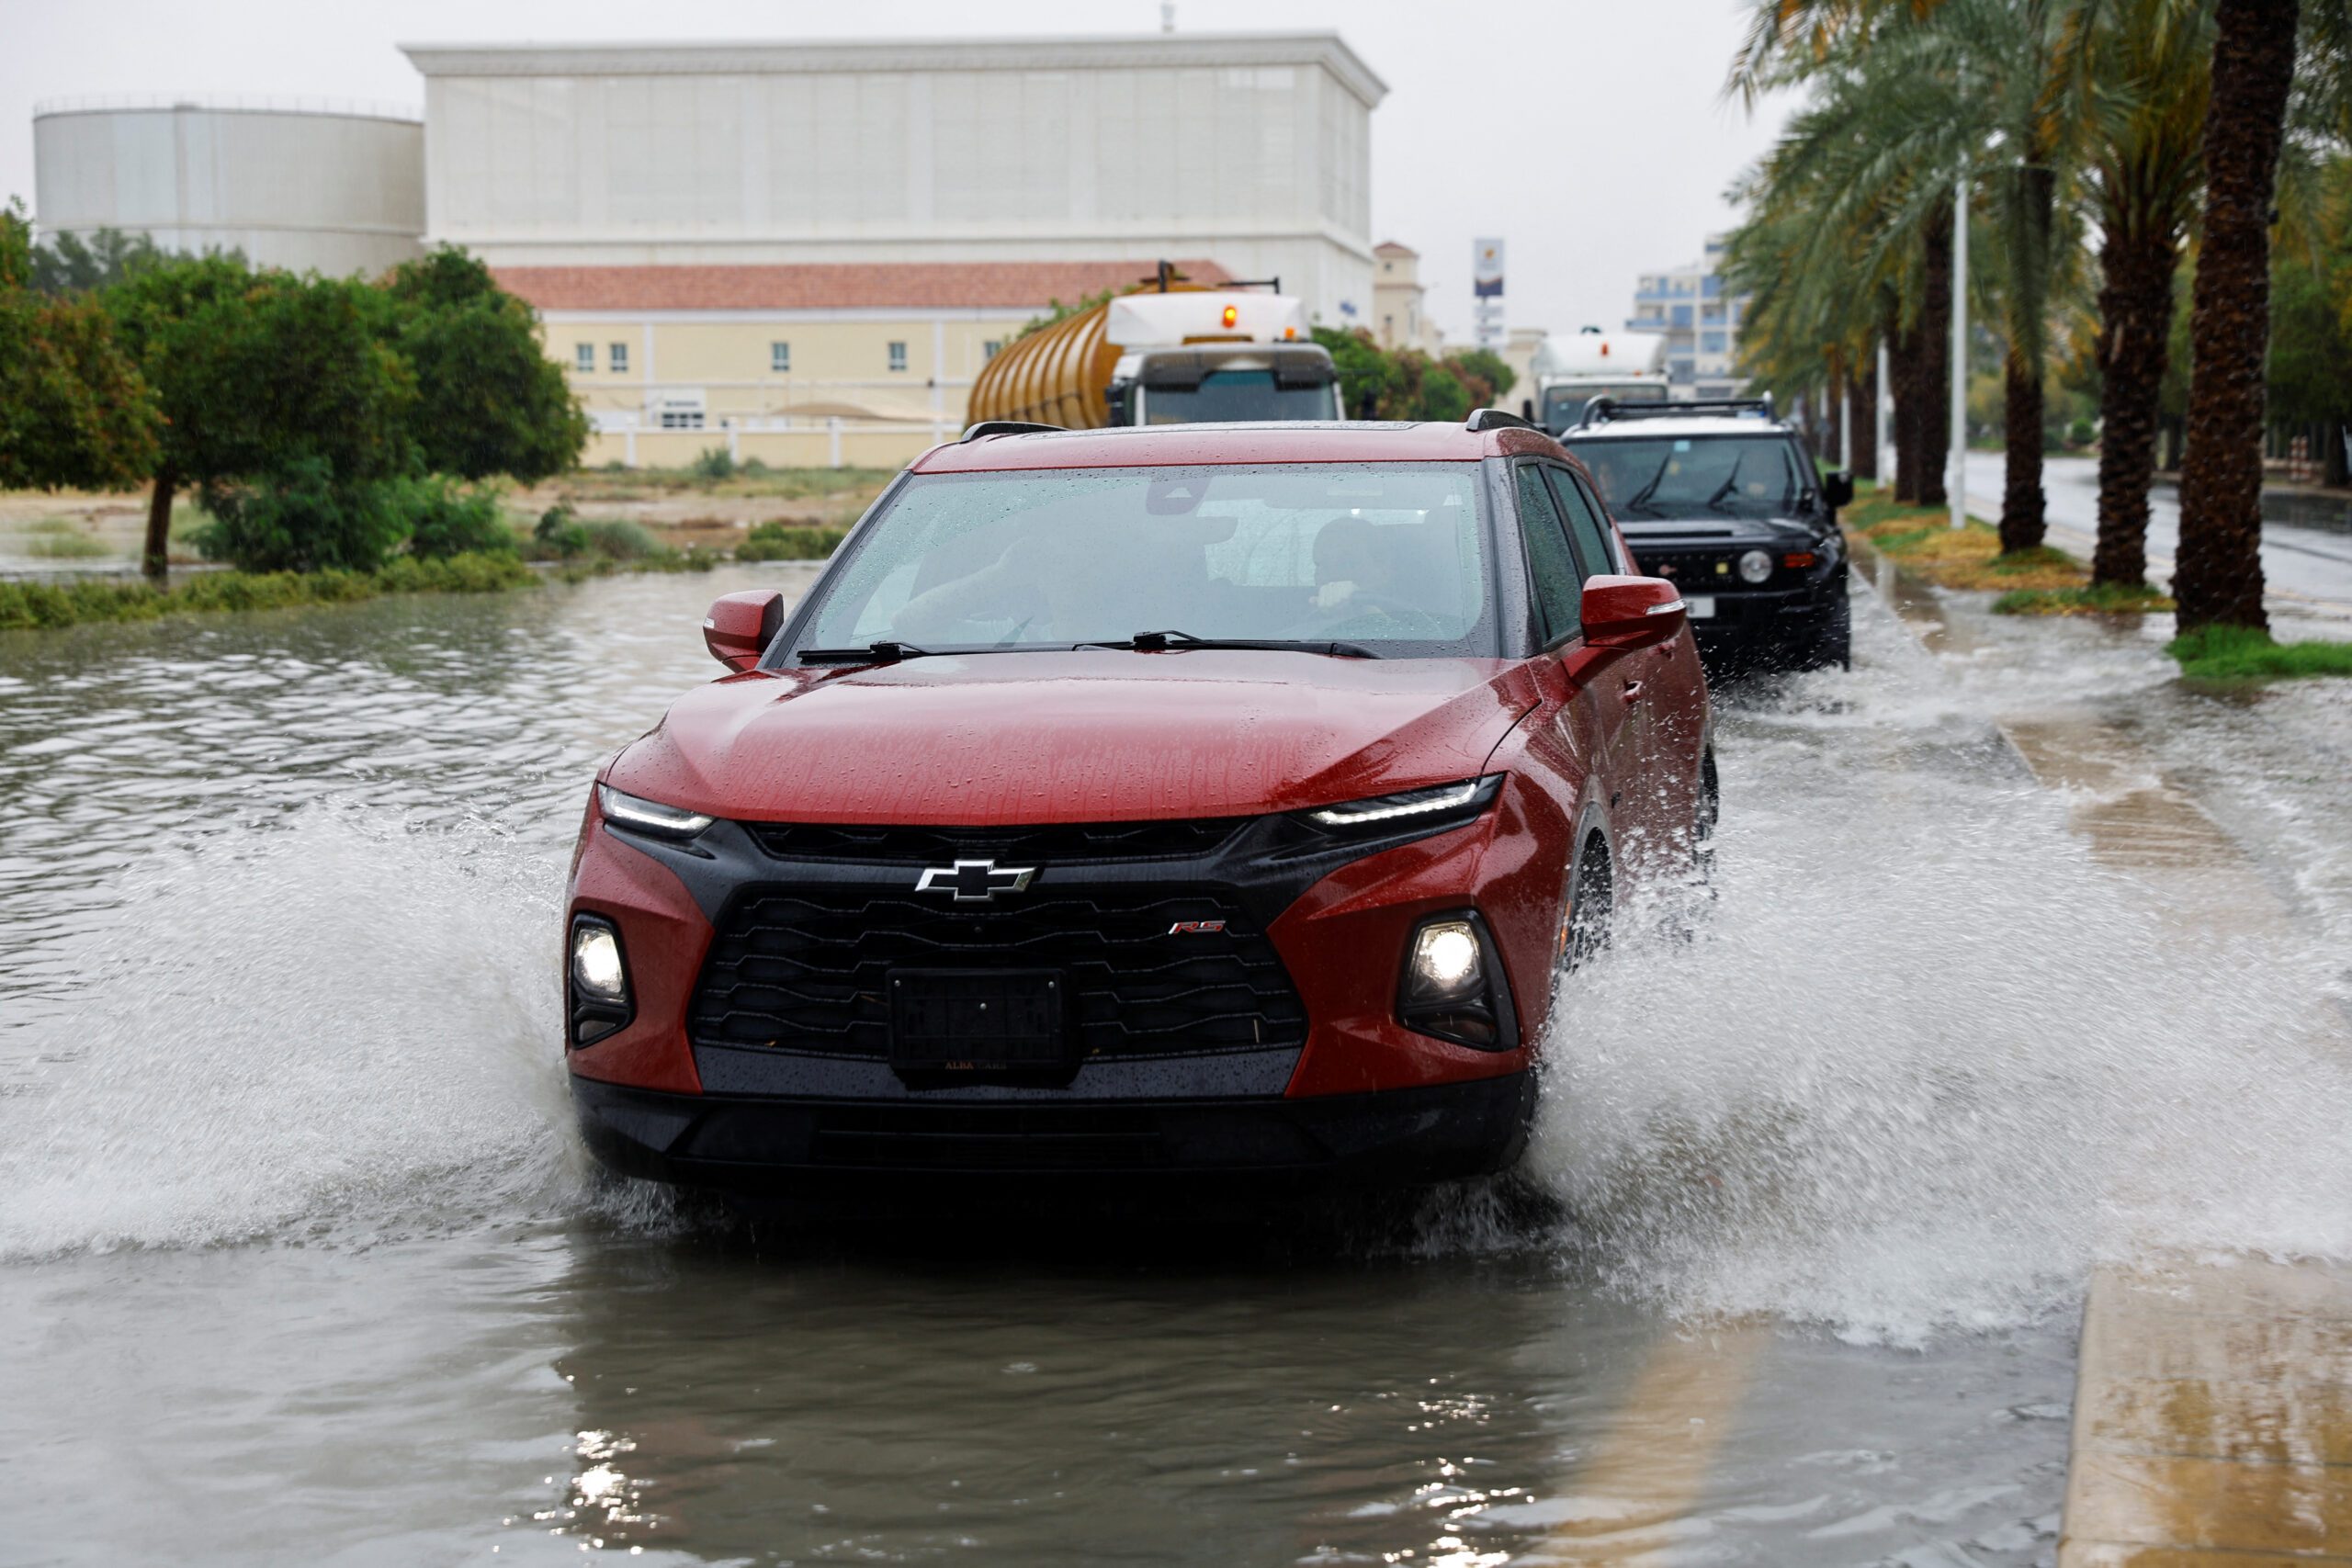 Damages to cars alone could cost Gulf insurance companies as much as $150 million